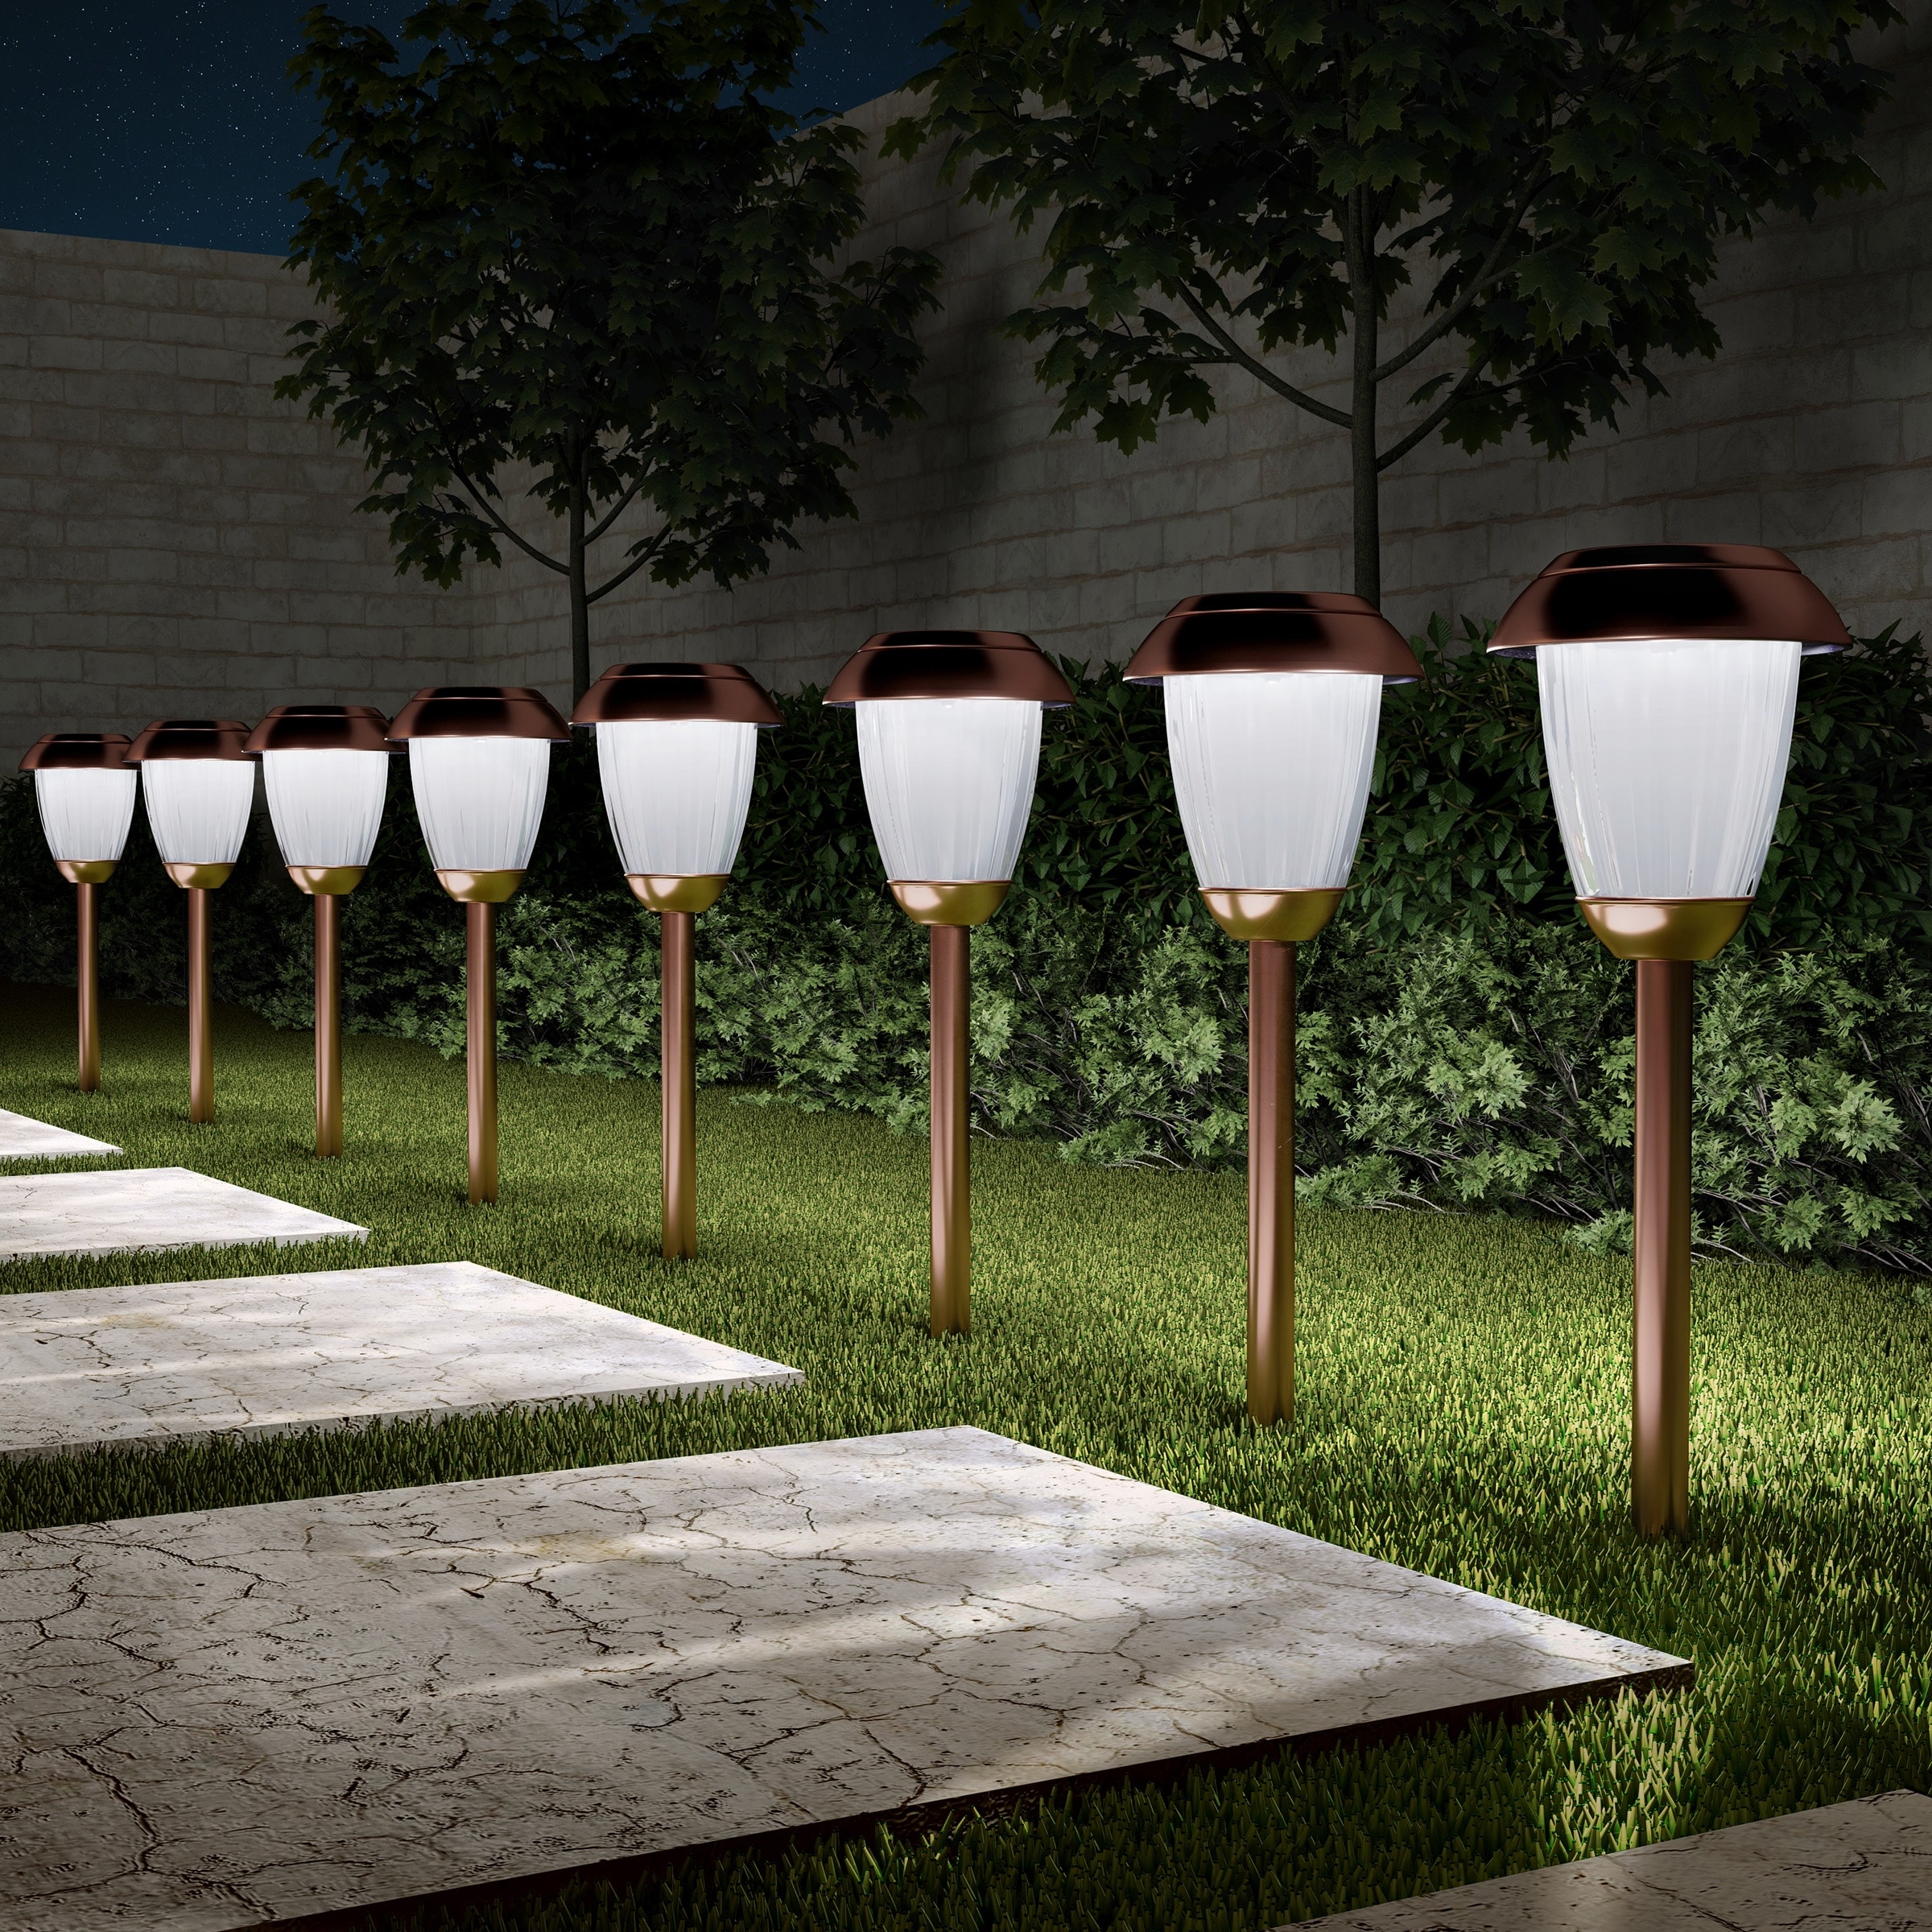 https://ak1.ostkcdn.com/images/products/is/images/direct/0cfa4858e373b9d8c8b940434211e215ce690e33/Solar-Path-Lights%2C-Set-of-8--16%22-Stainless-Steel-Stake-Lighting-Pure-Garden.jpg